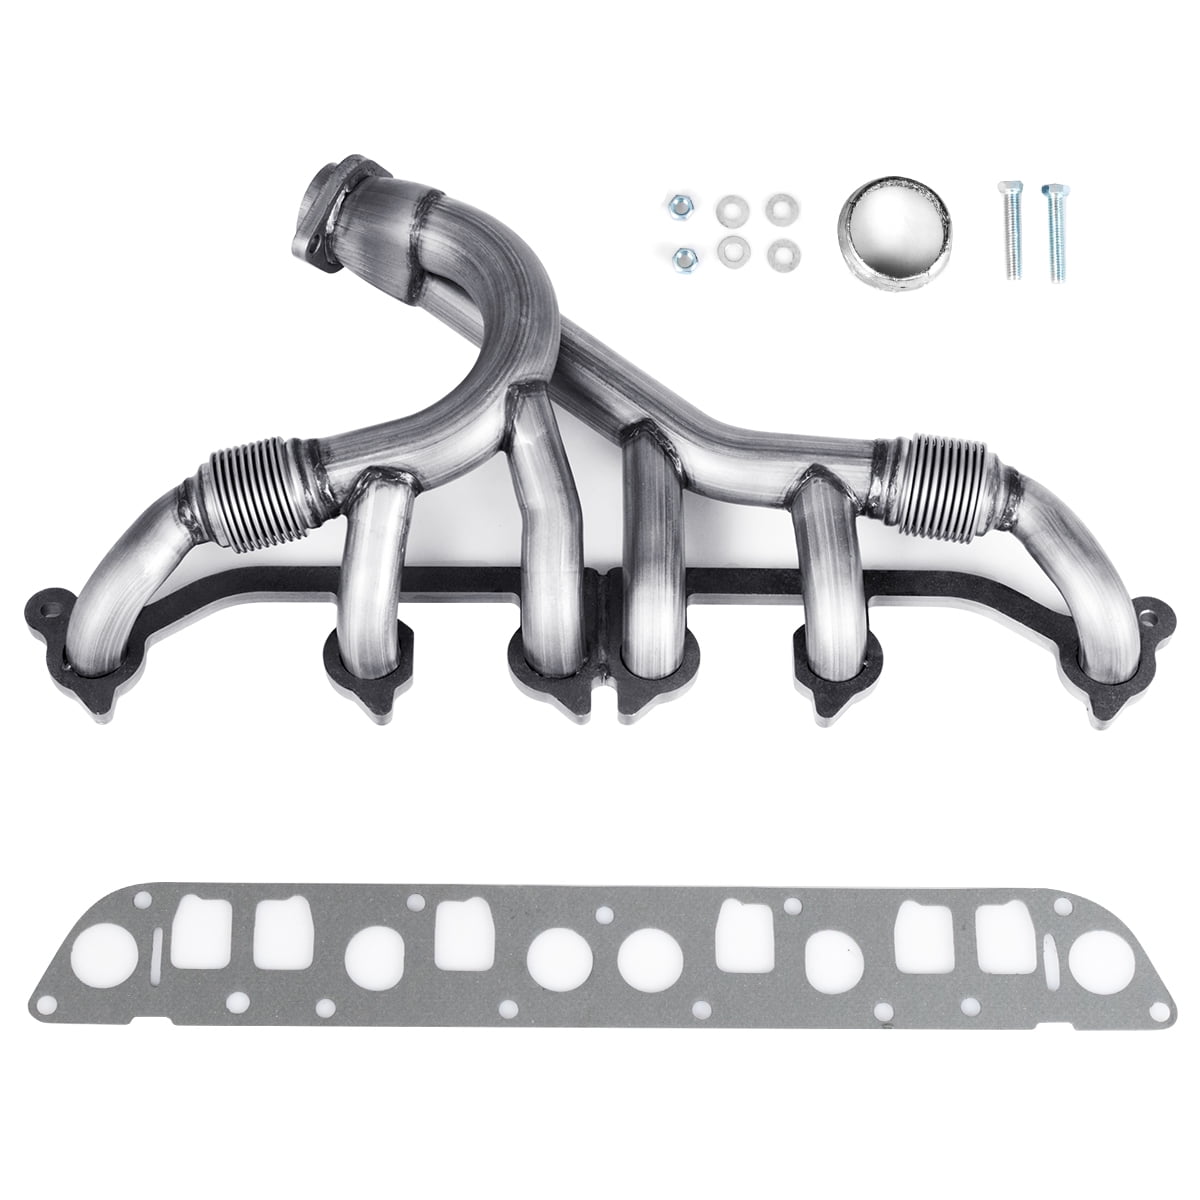 Costway Exhaust Manifold Kits Set Stainless Steel for Jeep Wrangler Grand  Cherokee 4.0L - Walmart.com